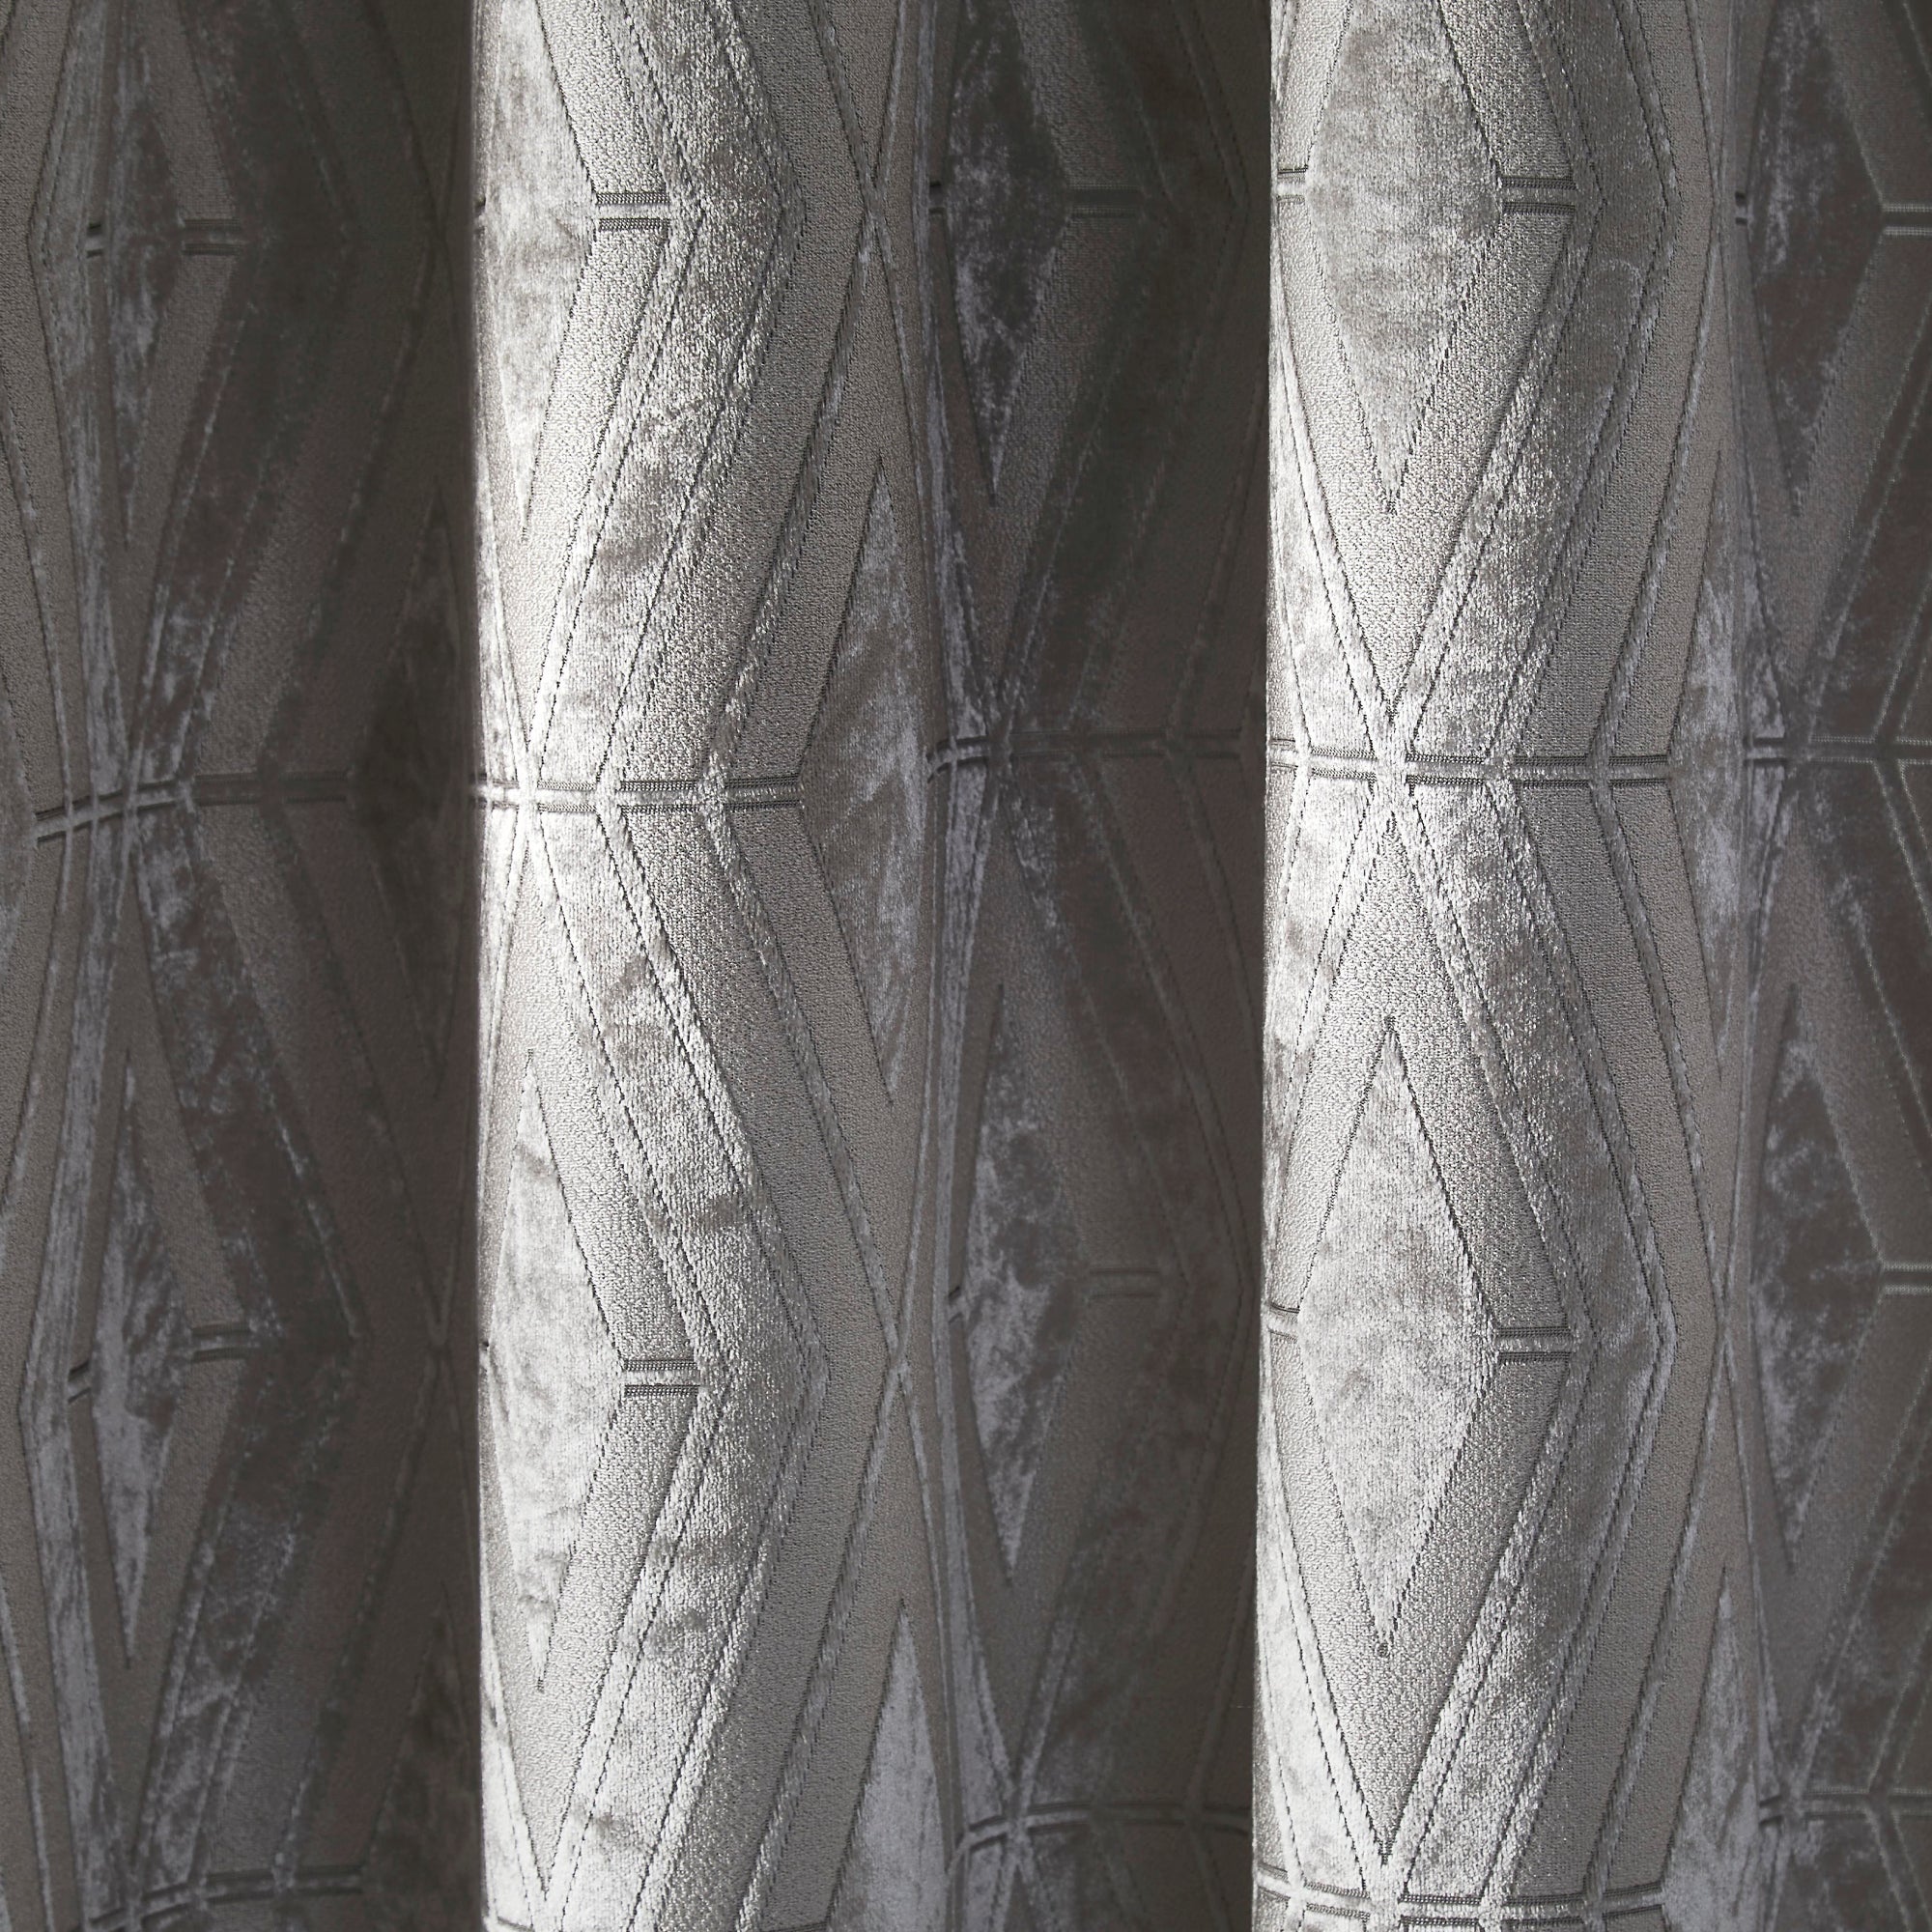 Pair of Eyelet Curtains Marco by Curtina in Silver